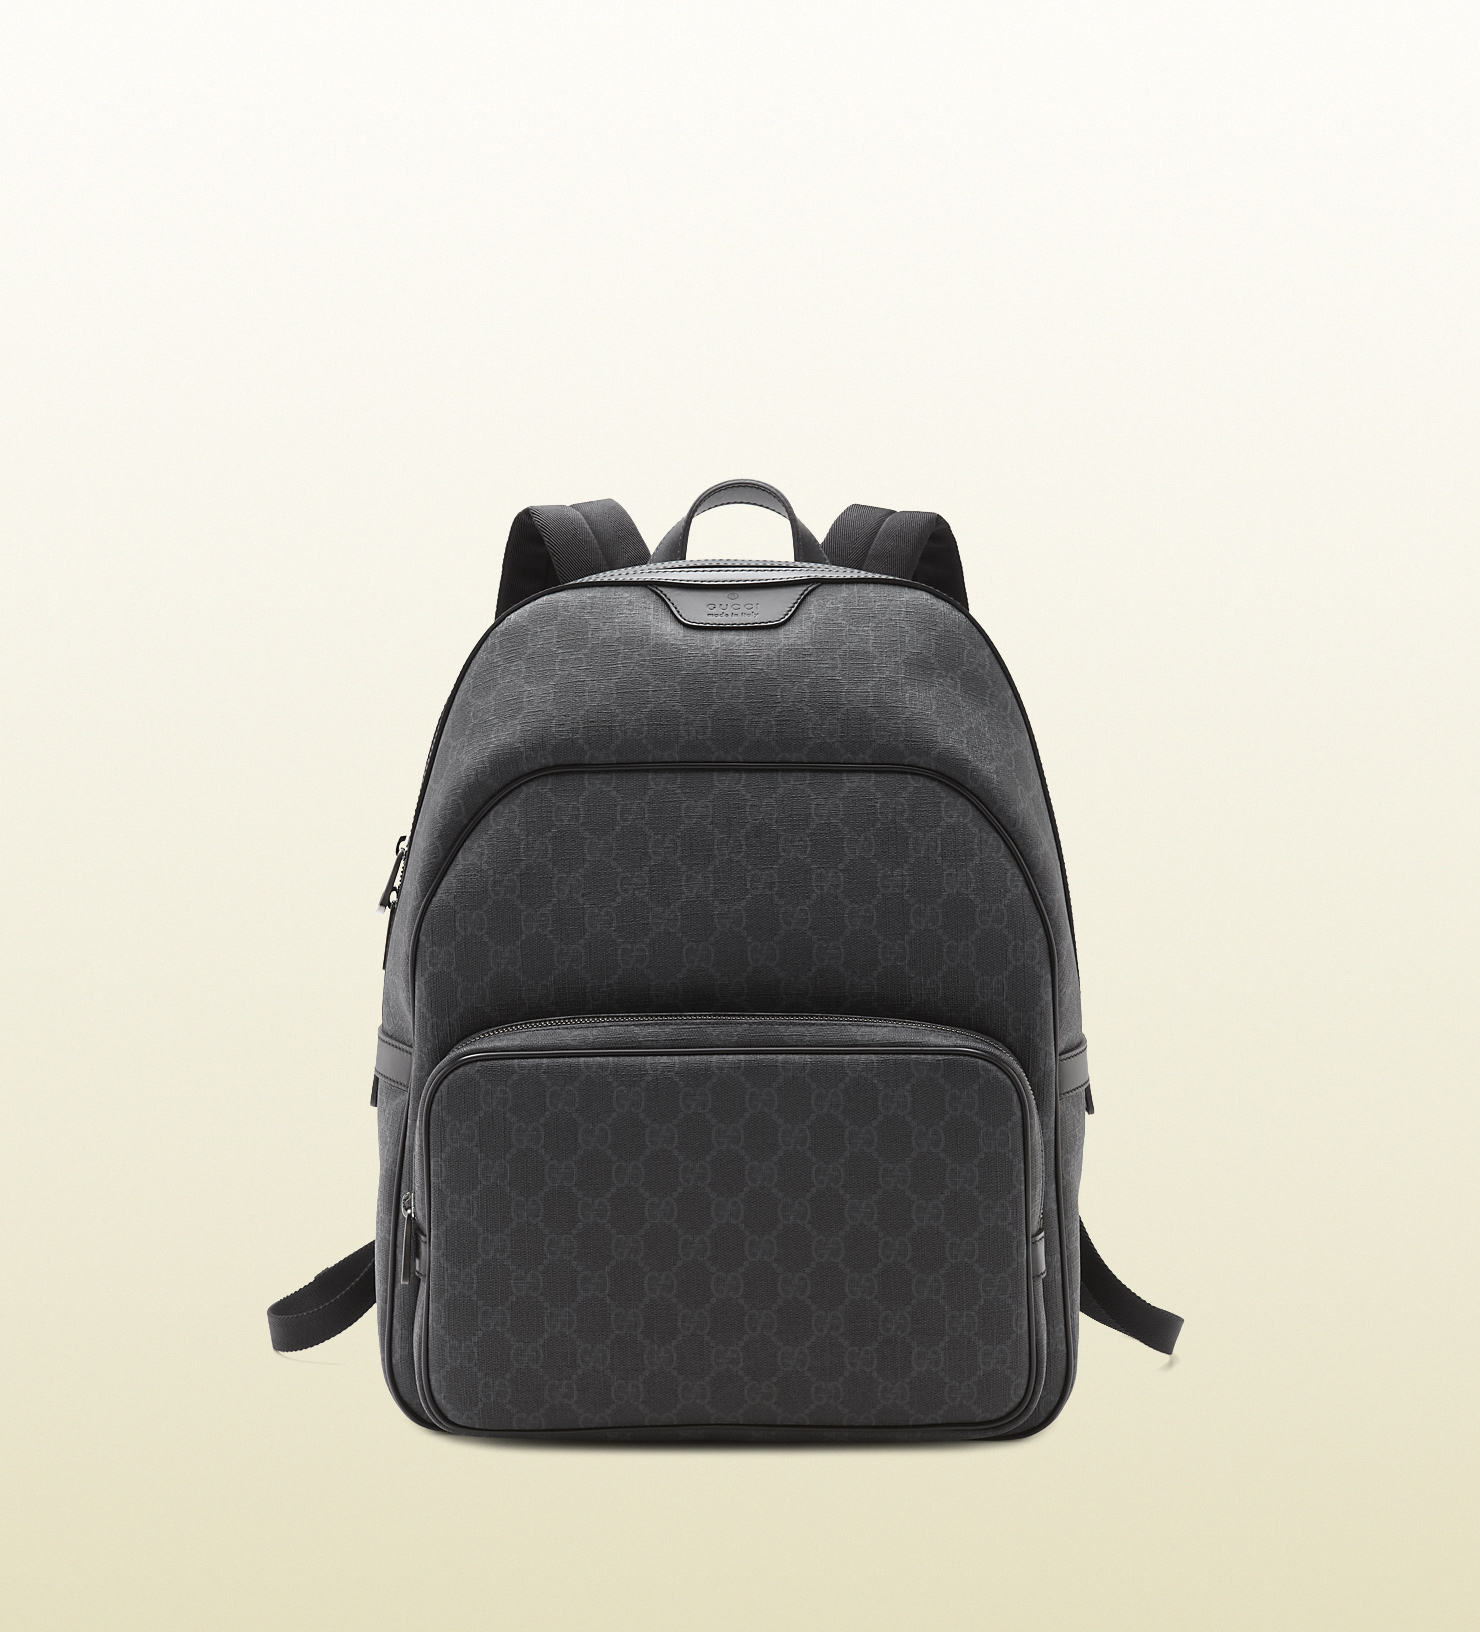 Gucci Gg Supreme Canvas Backpack in Gray for Men (grey) | Lyst